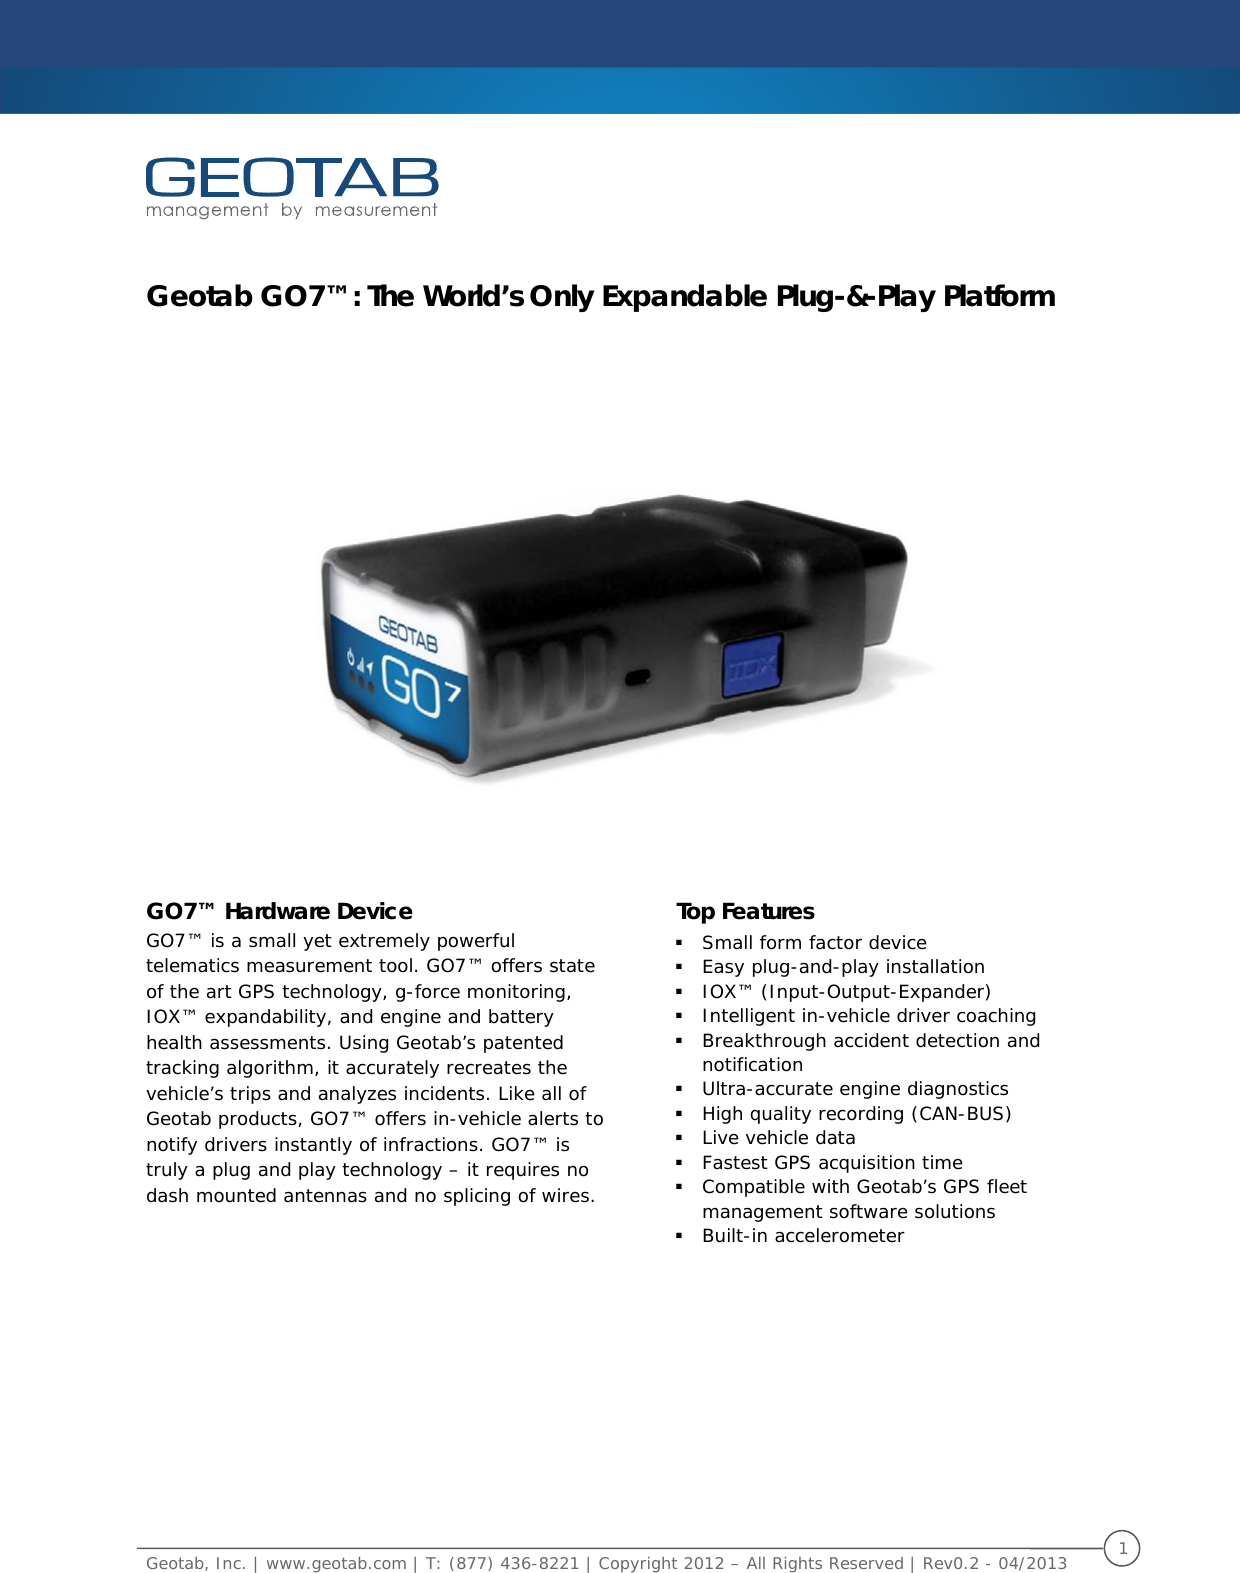    Geotab, Inc. | www.geotab.com | T: (877) 436-8221 | Copyright 2012 – All Rights Reserved | Rev0.2 - 04/2013  1   Geotab GO7™: The World’s Only Expandable Plug-&amp;-Play Platform     GO7™ Hardware Device GO7™ is a small yet extremely powerful telematics measurement tool. GO7™ offers state of the art GPS technology, g-force monitoring, IOX™ expandability, and engine and battery health assessments. Using Geotab’s patented tracking algorithm, it accurately recreates the vehicle’s trips and analyzes incidents. Like all of Geotab products, GO7™ offers in-vehicle alerts to notify drivers instantly of infractions. GO7™ is truly a plug and play technology – it requires no dash mounted antennas and no splicing of wires.  Top Features  Small form factor device  Easy plug-and-play installation  IOX™ (Input-Output-Expander)  Intelligent in-vehicle driver coaching  Breakthrough accident detection and notification  Ultra-accurate engine diagnostics  High quality recording (CAN-BUS)  Live vehicle data  Fastest GPS acquisition time  Compatible with Geotab’s GPS fleet management software solutions Built-in accelerometer     